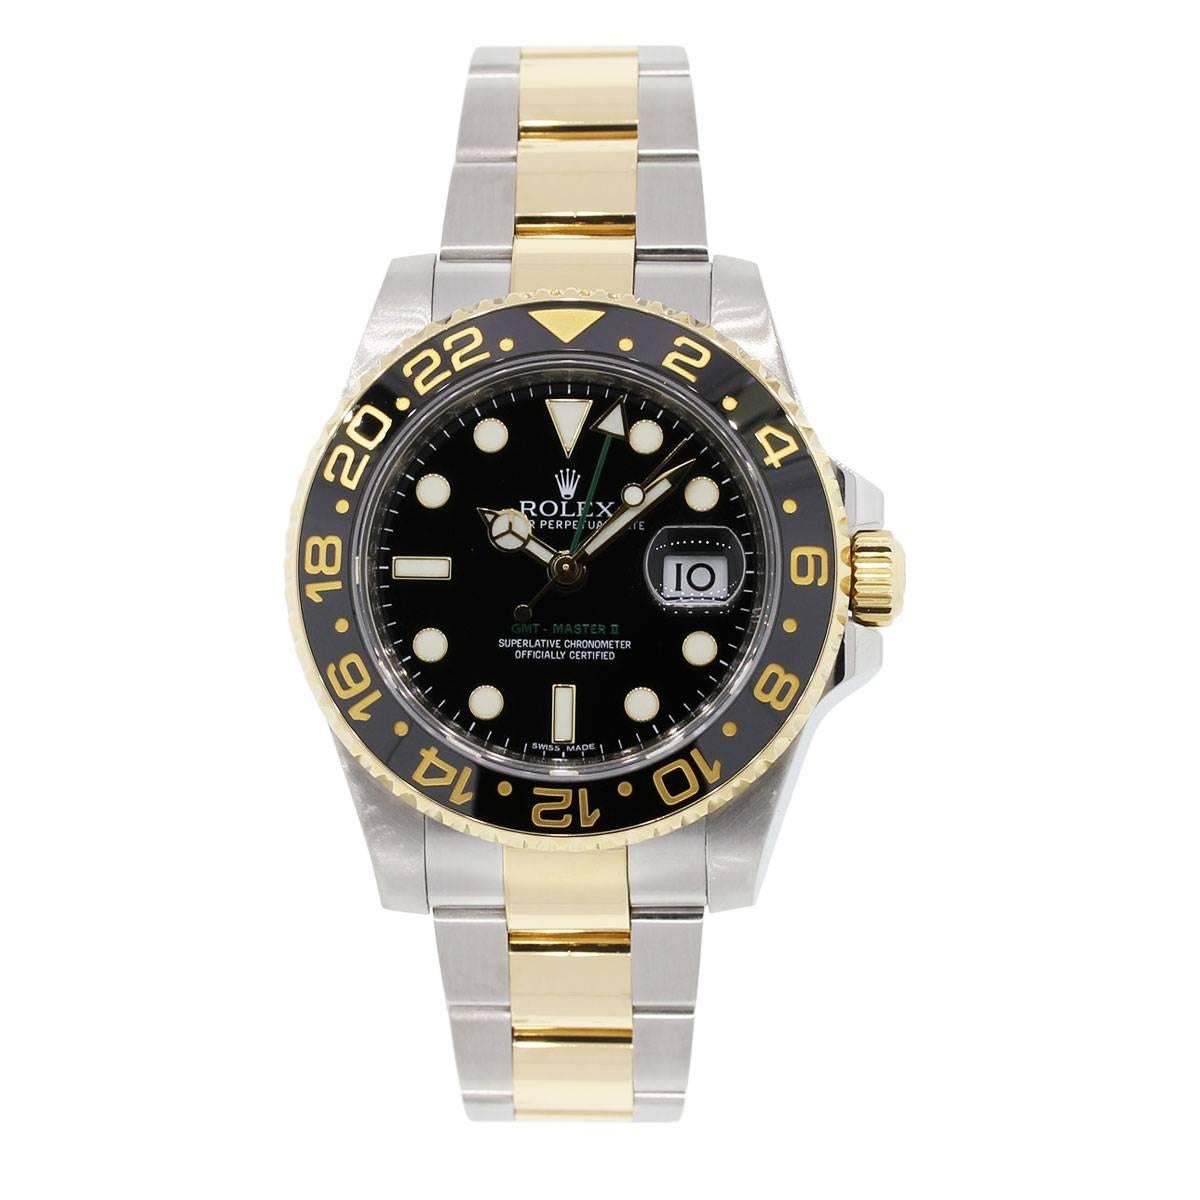 Brand: Rolex
MPN: 116713
Model: GMT-Master II
Serial: Scrambled serial
Case Material: Stainless Steel
Case Diameter: 40mm
Bezel: Ceramic black and yellow bidirectional bezel
Dial: Black dial with date window at 3 o'clock
Bracelet: Two Tone